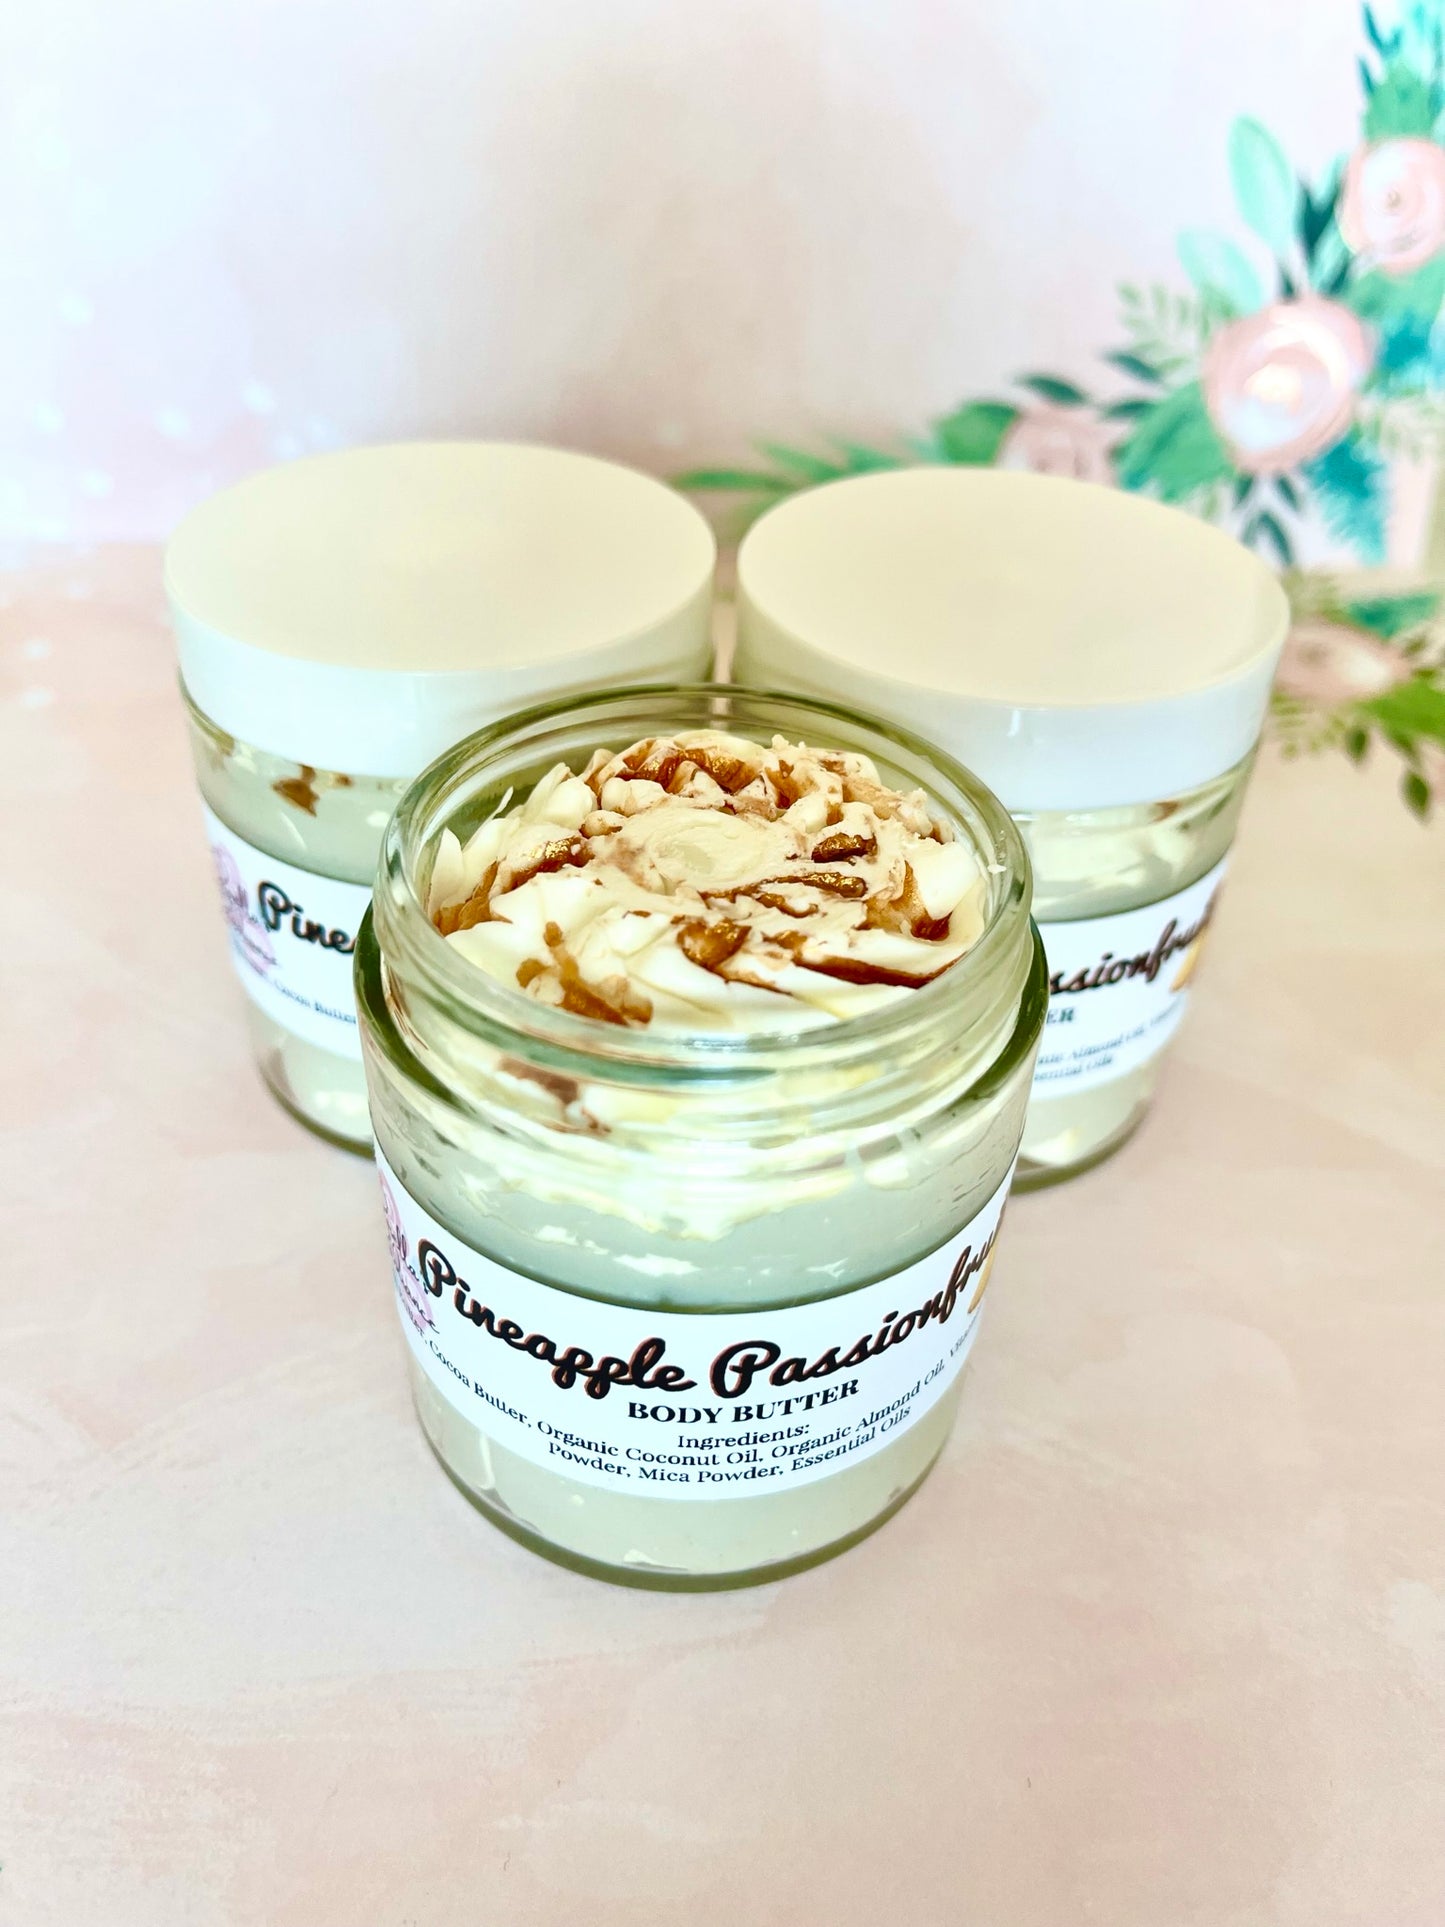 Pineapple Passionfruit Body Butter